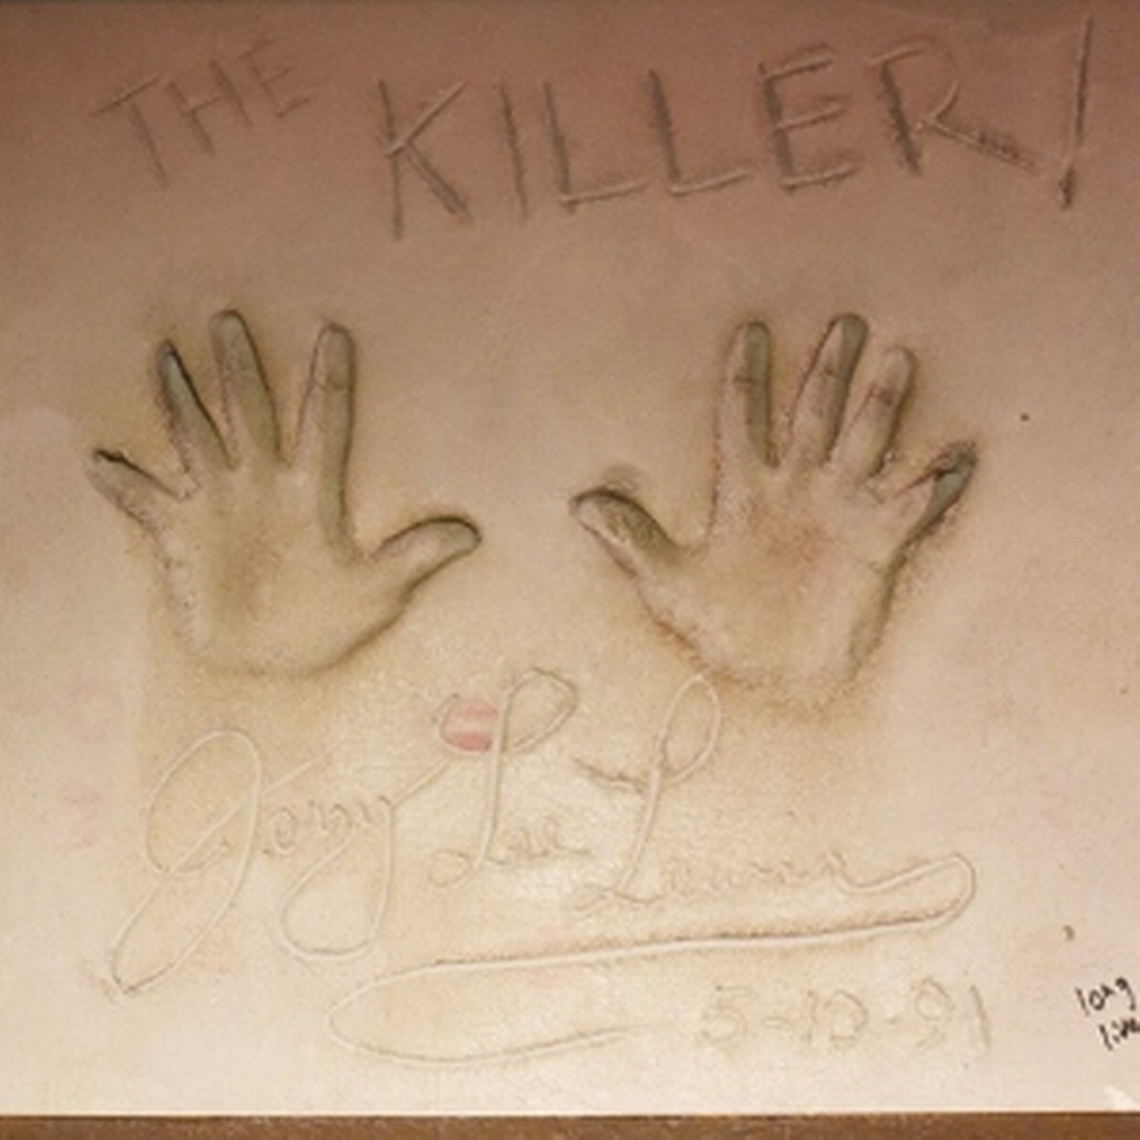 Jerry Lee Lewis had his handprint’s cemented at Billy Bob’s Texas on May 10, 1991.